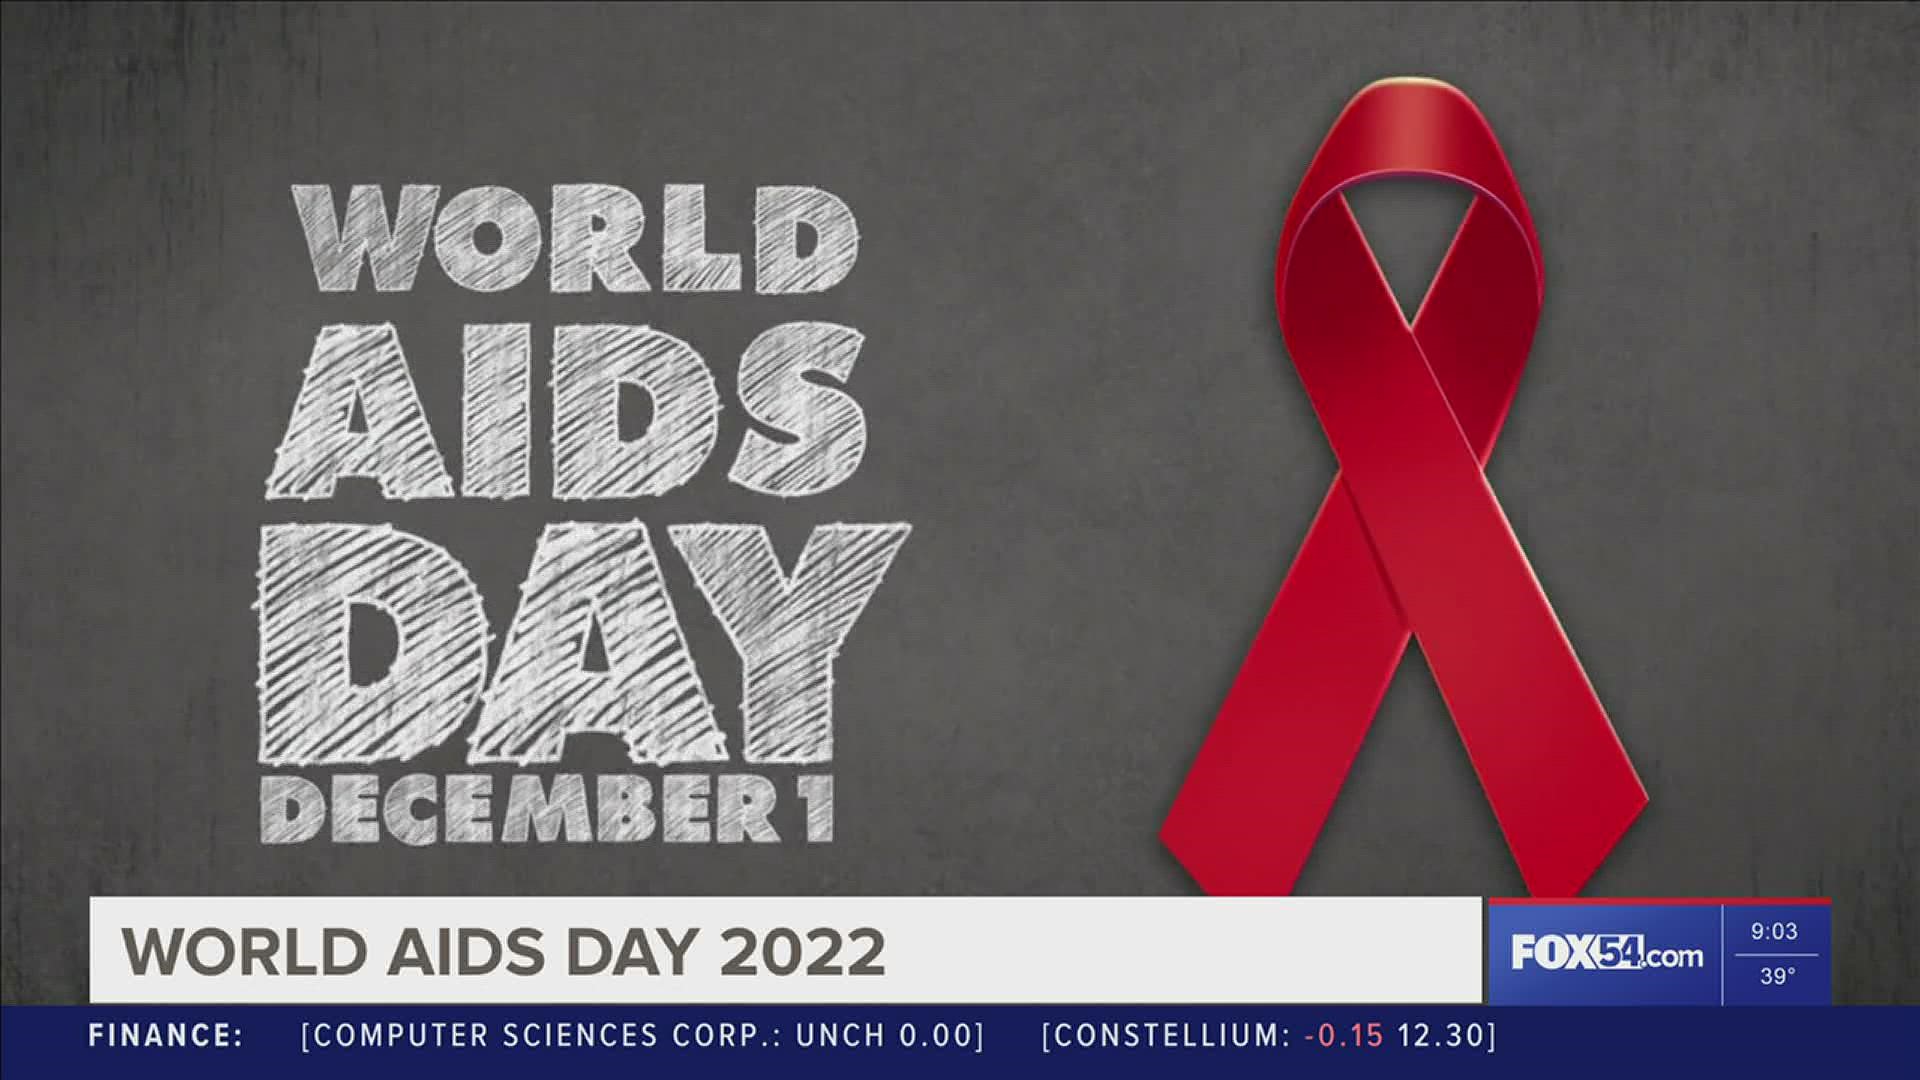 World Aids Day is held December 1st each other. It provides an opportunity for public private partners to spread awareness about the disease.